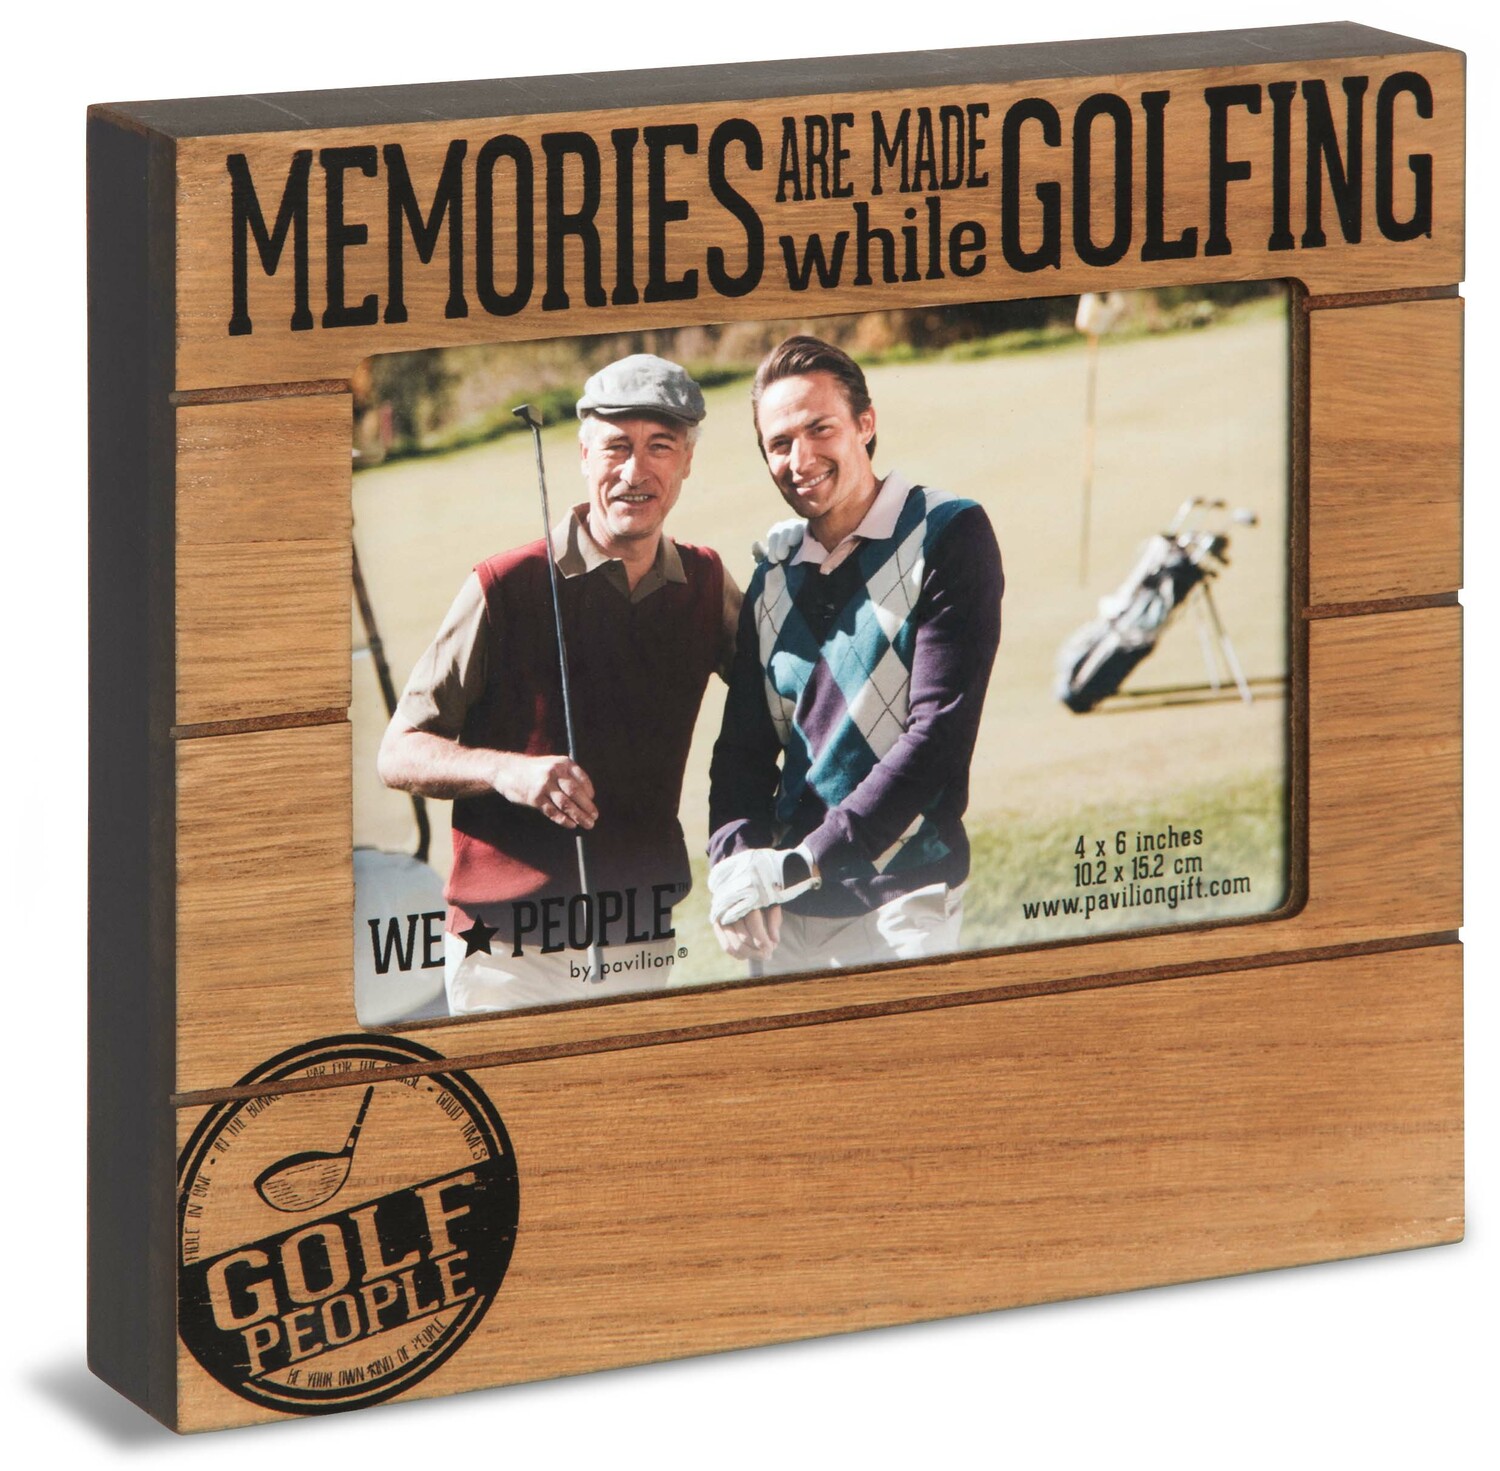 Golf People by We People - Golf People - 6.75" x 7.5" Frame (Holds 4" x 6" Photo)